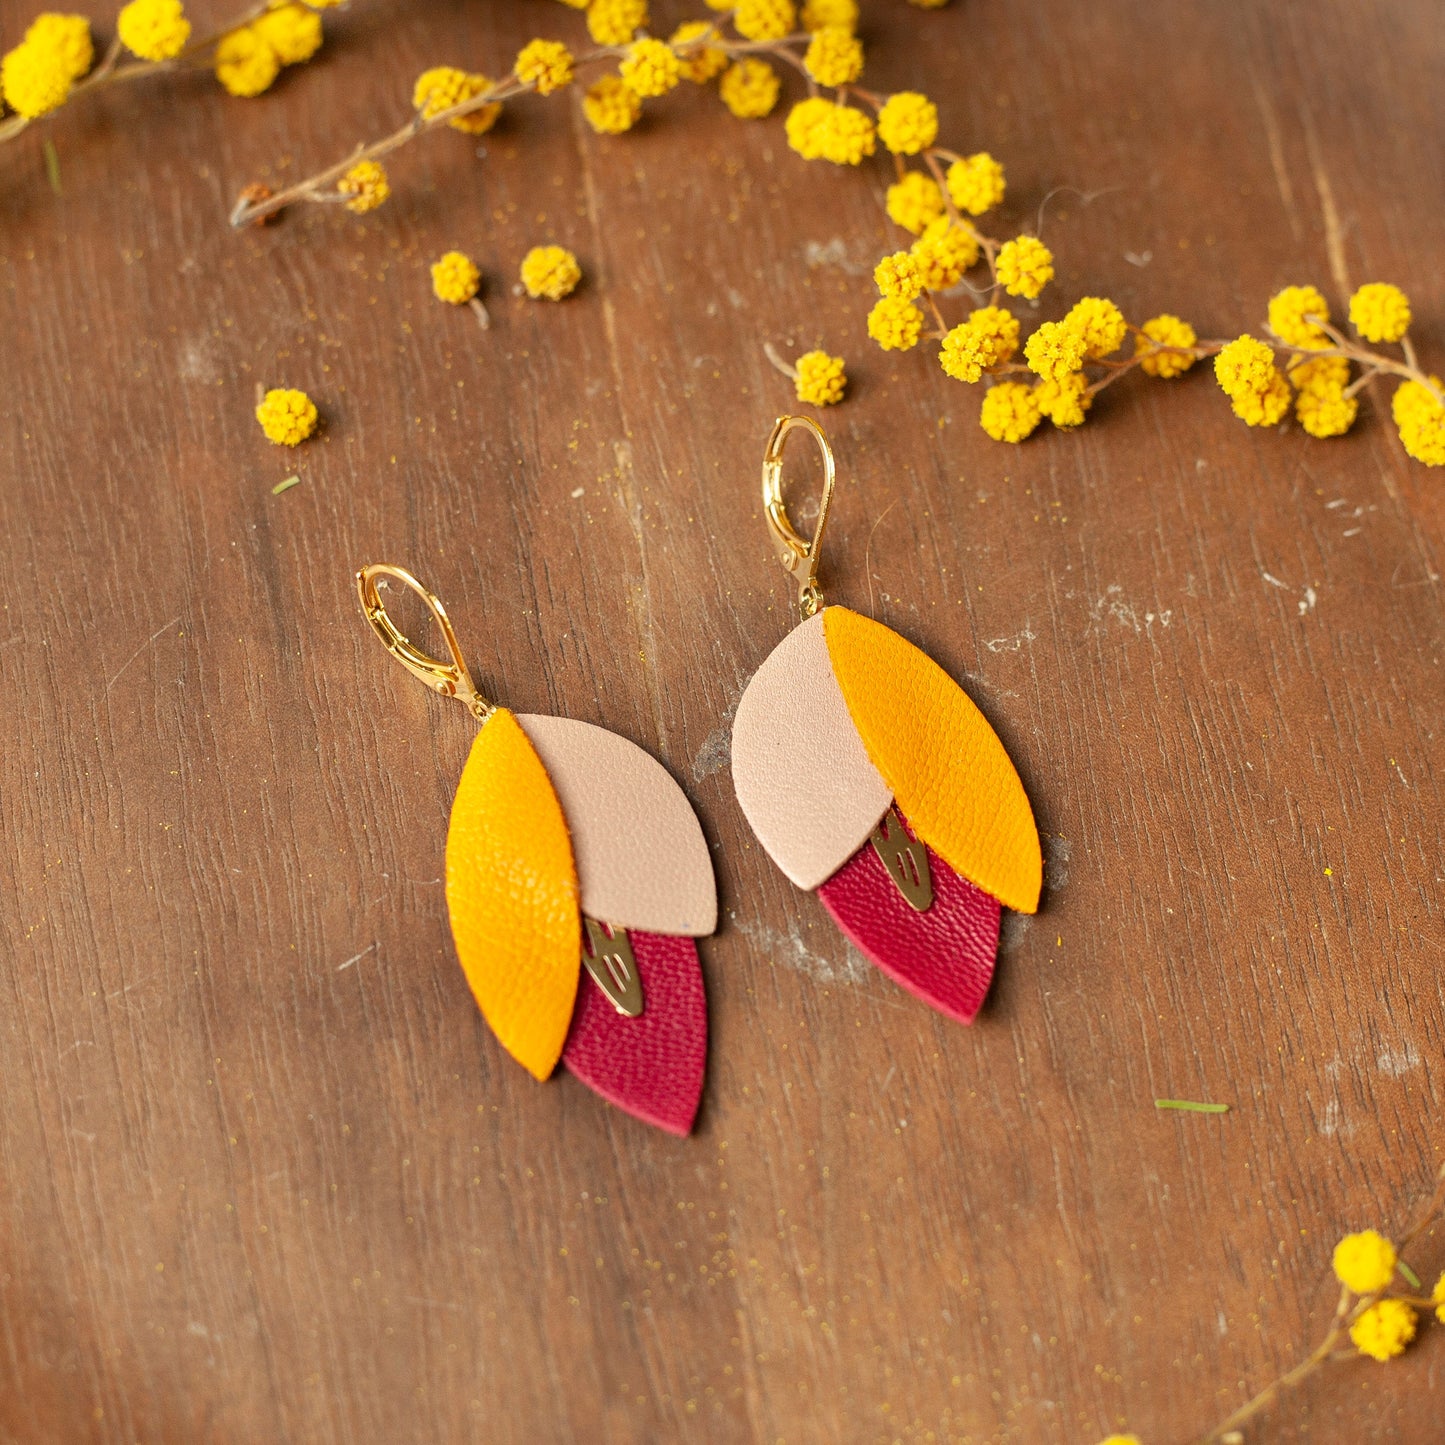 Flower earrings in orange, red and pink leather